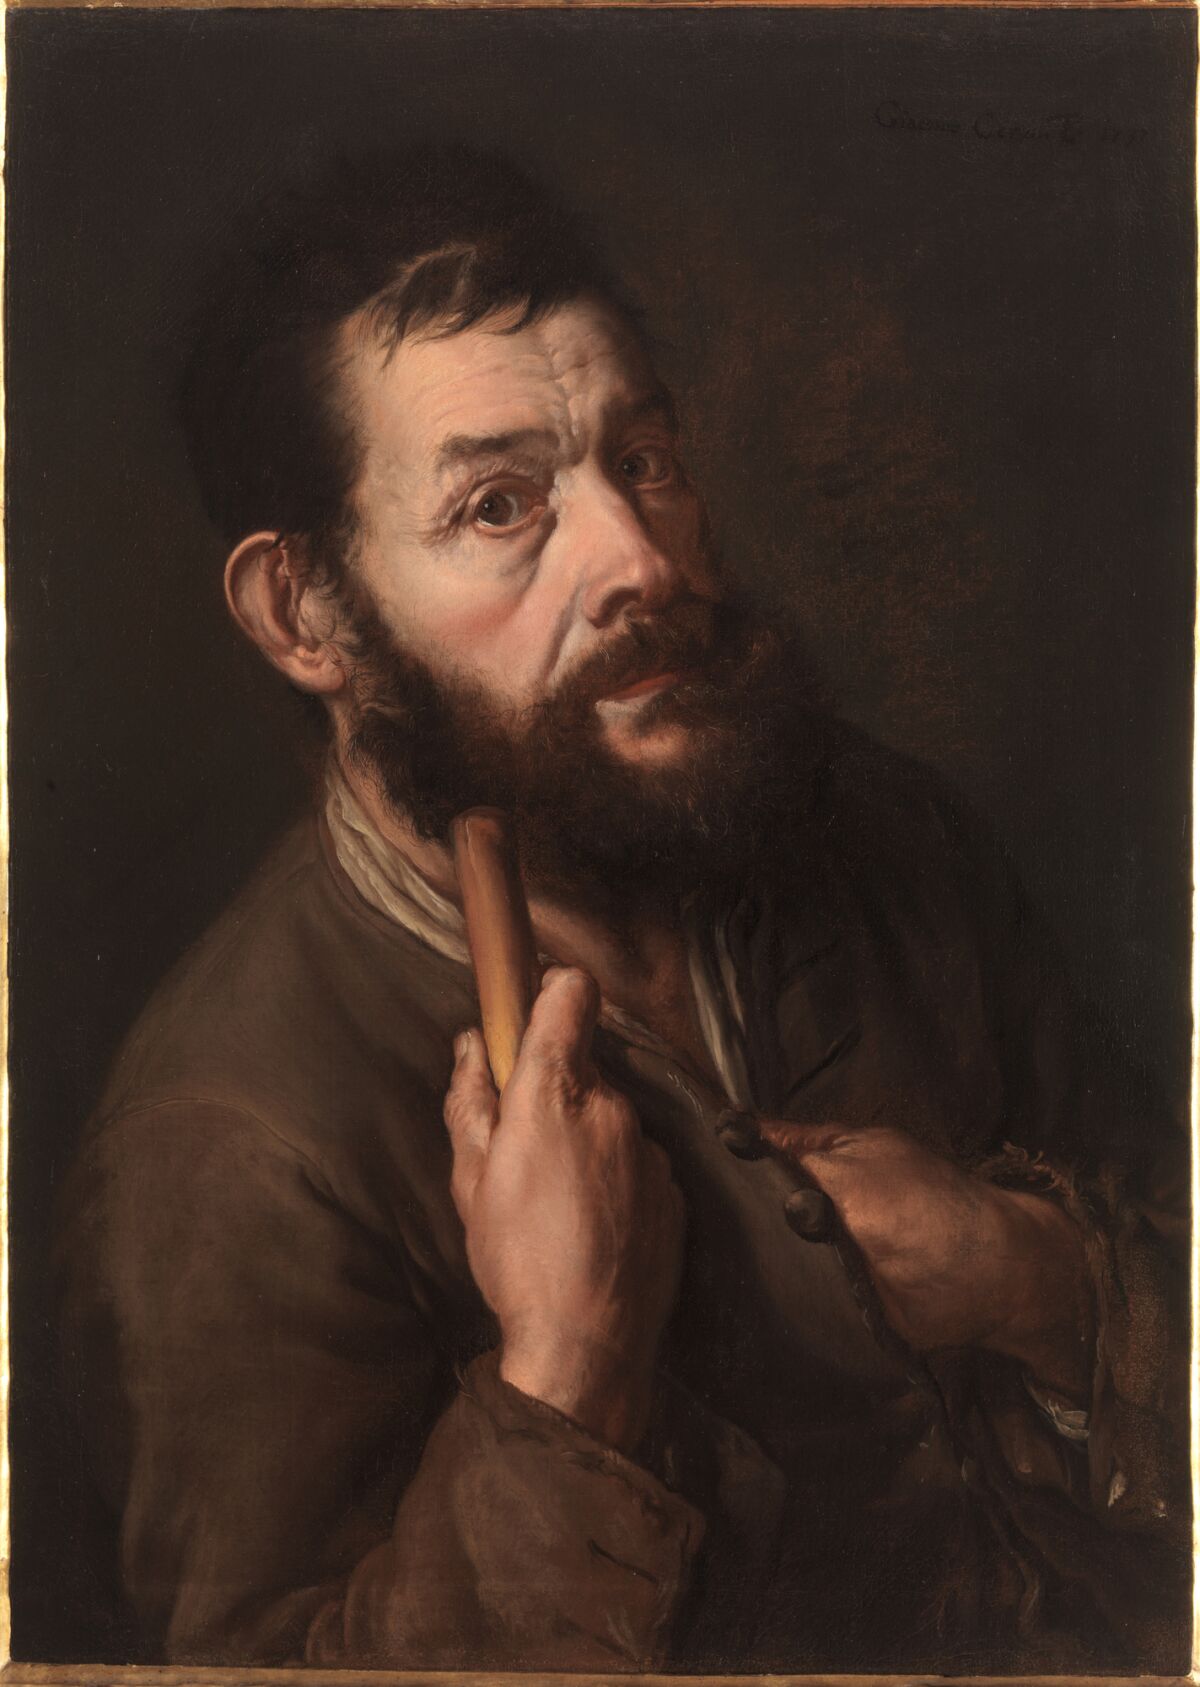 In his 1737 "Self-Portrait as a Pilgrim," painter Giacomo Ceruti tucked his hand inside his jacket.